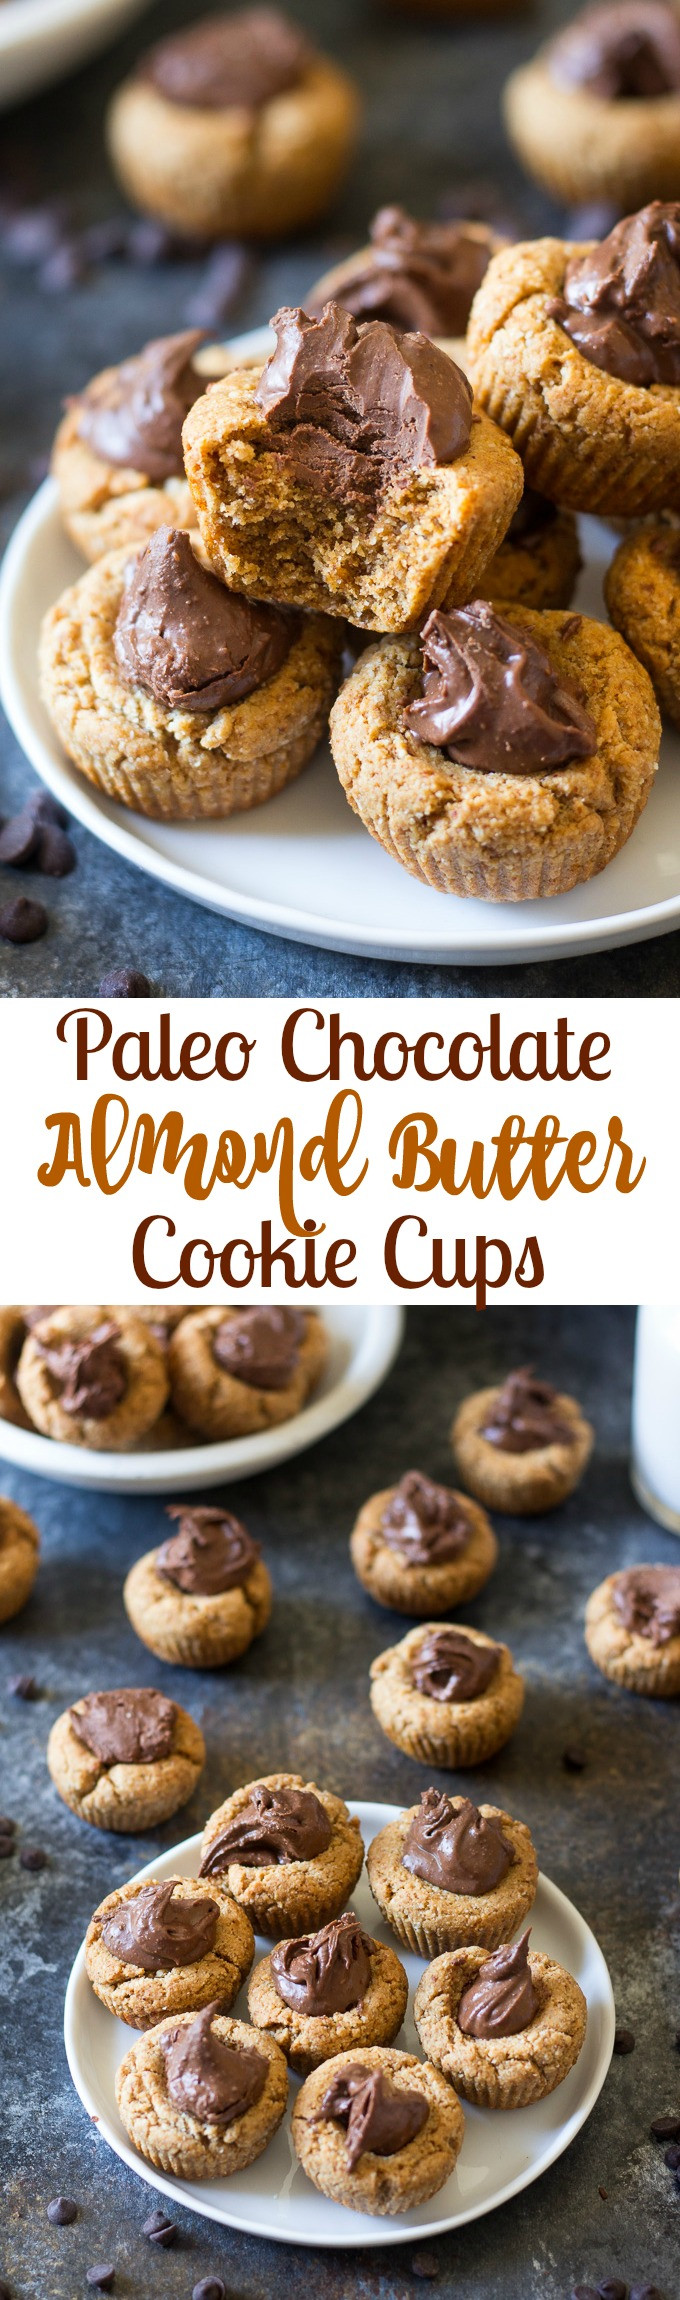 Paleo Almond Butter Cookies
 Paleo Chocolate Almond Butter Cookie Cups